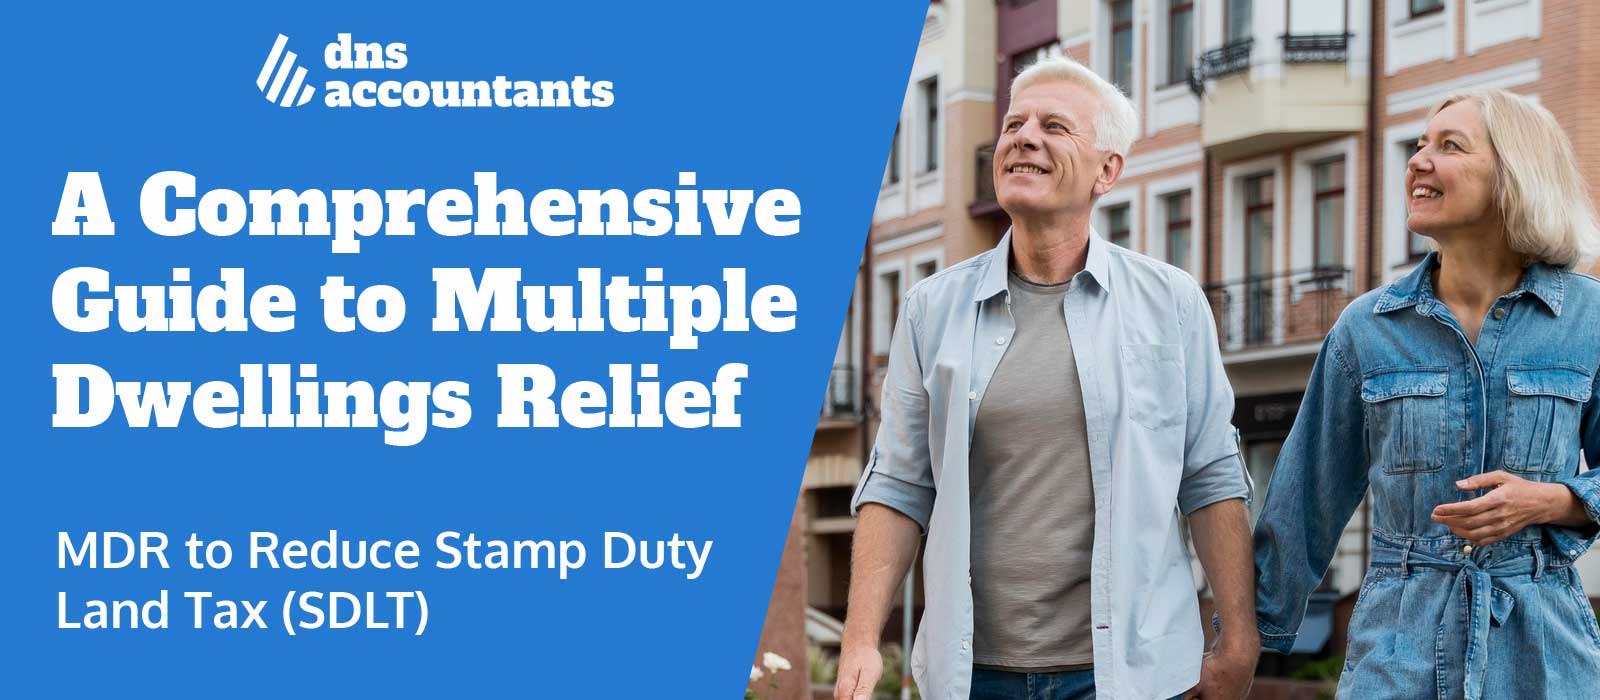 Multiple Dwellings Relief (MDR) to Reduce Stamp Duty Land Tax (SDLT)